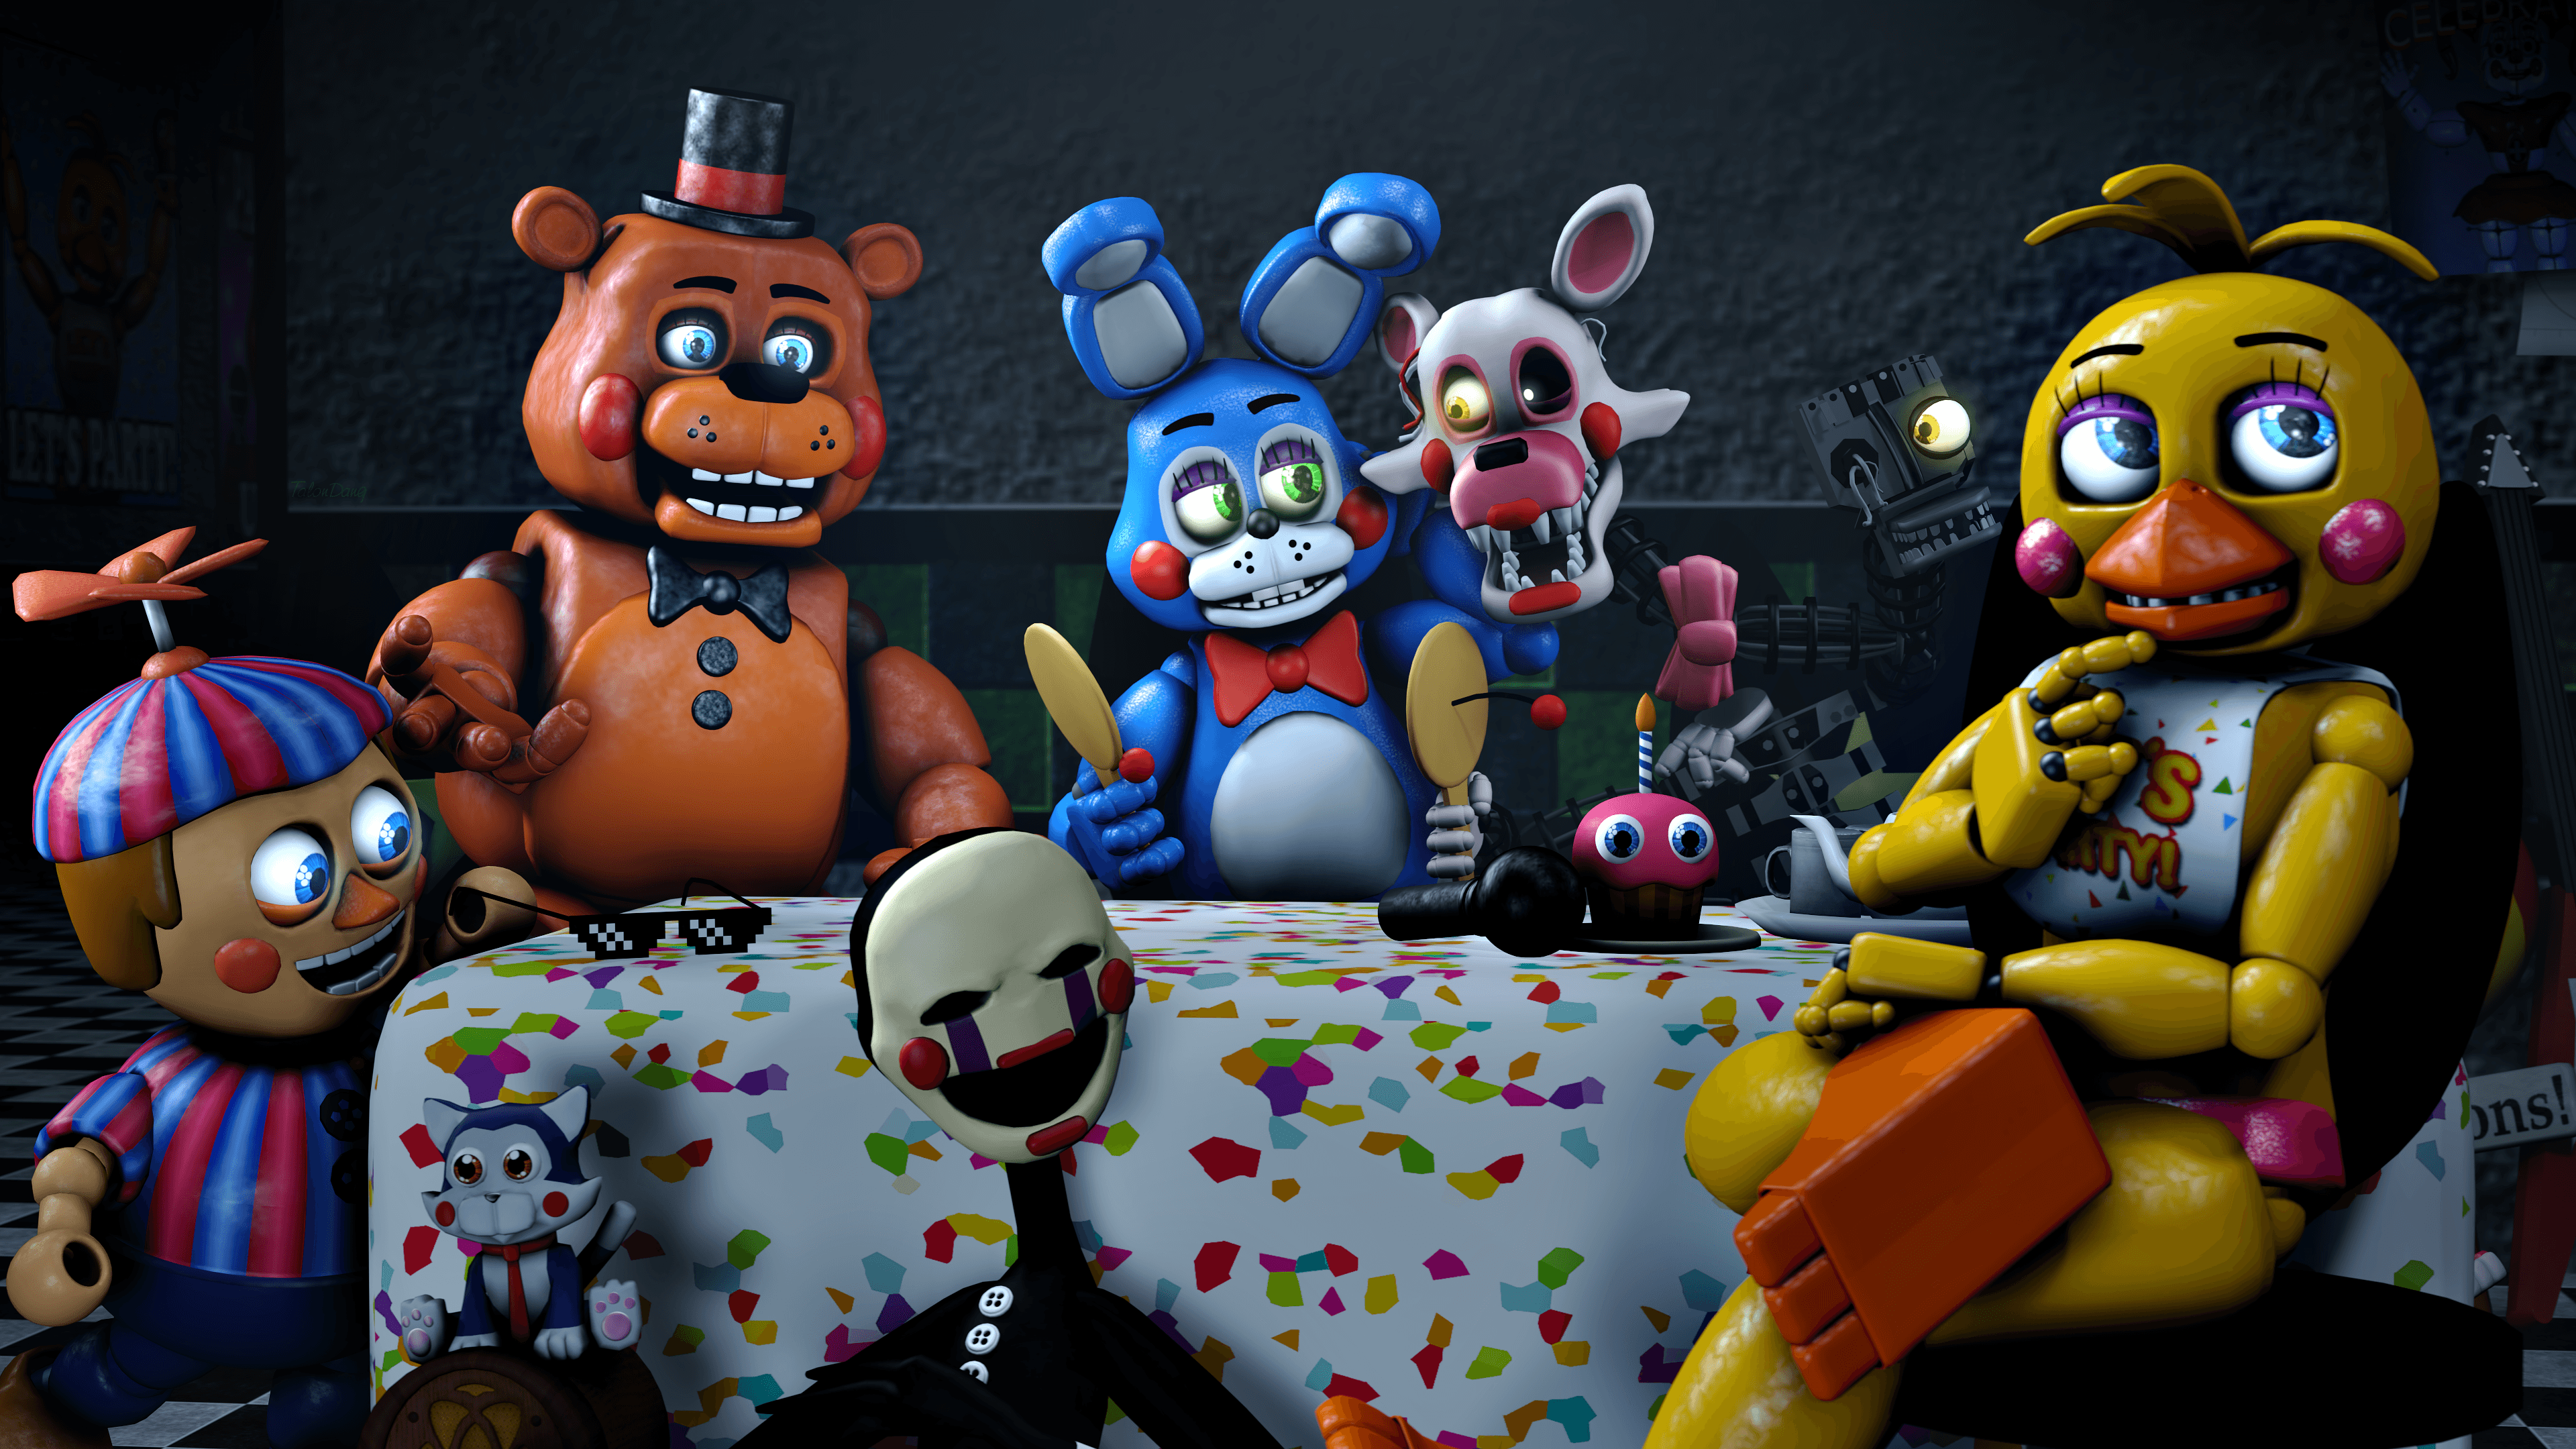 Five Nights At Freddy's 2 4k Ultra HD Wallpaper. Background Image